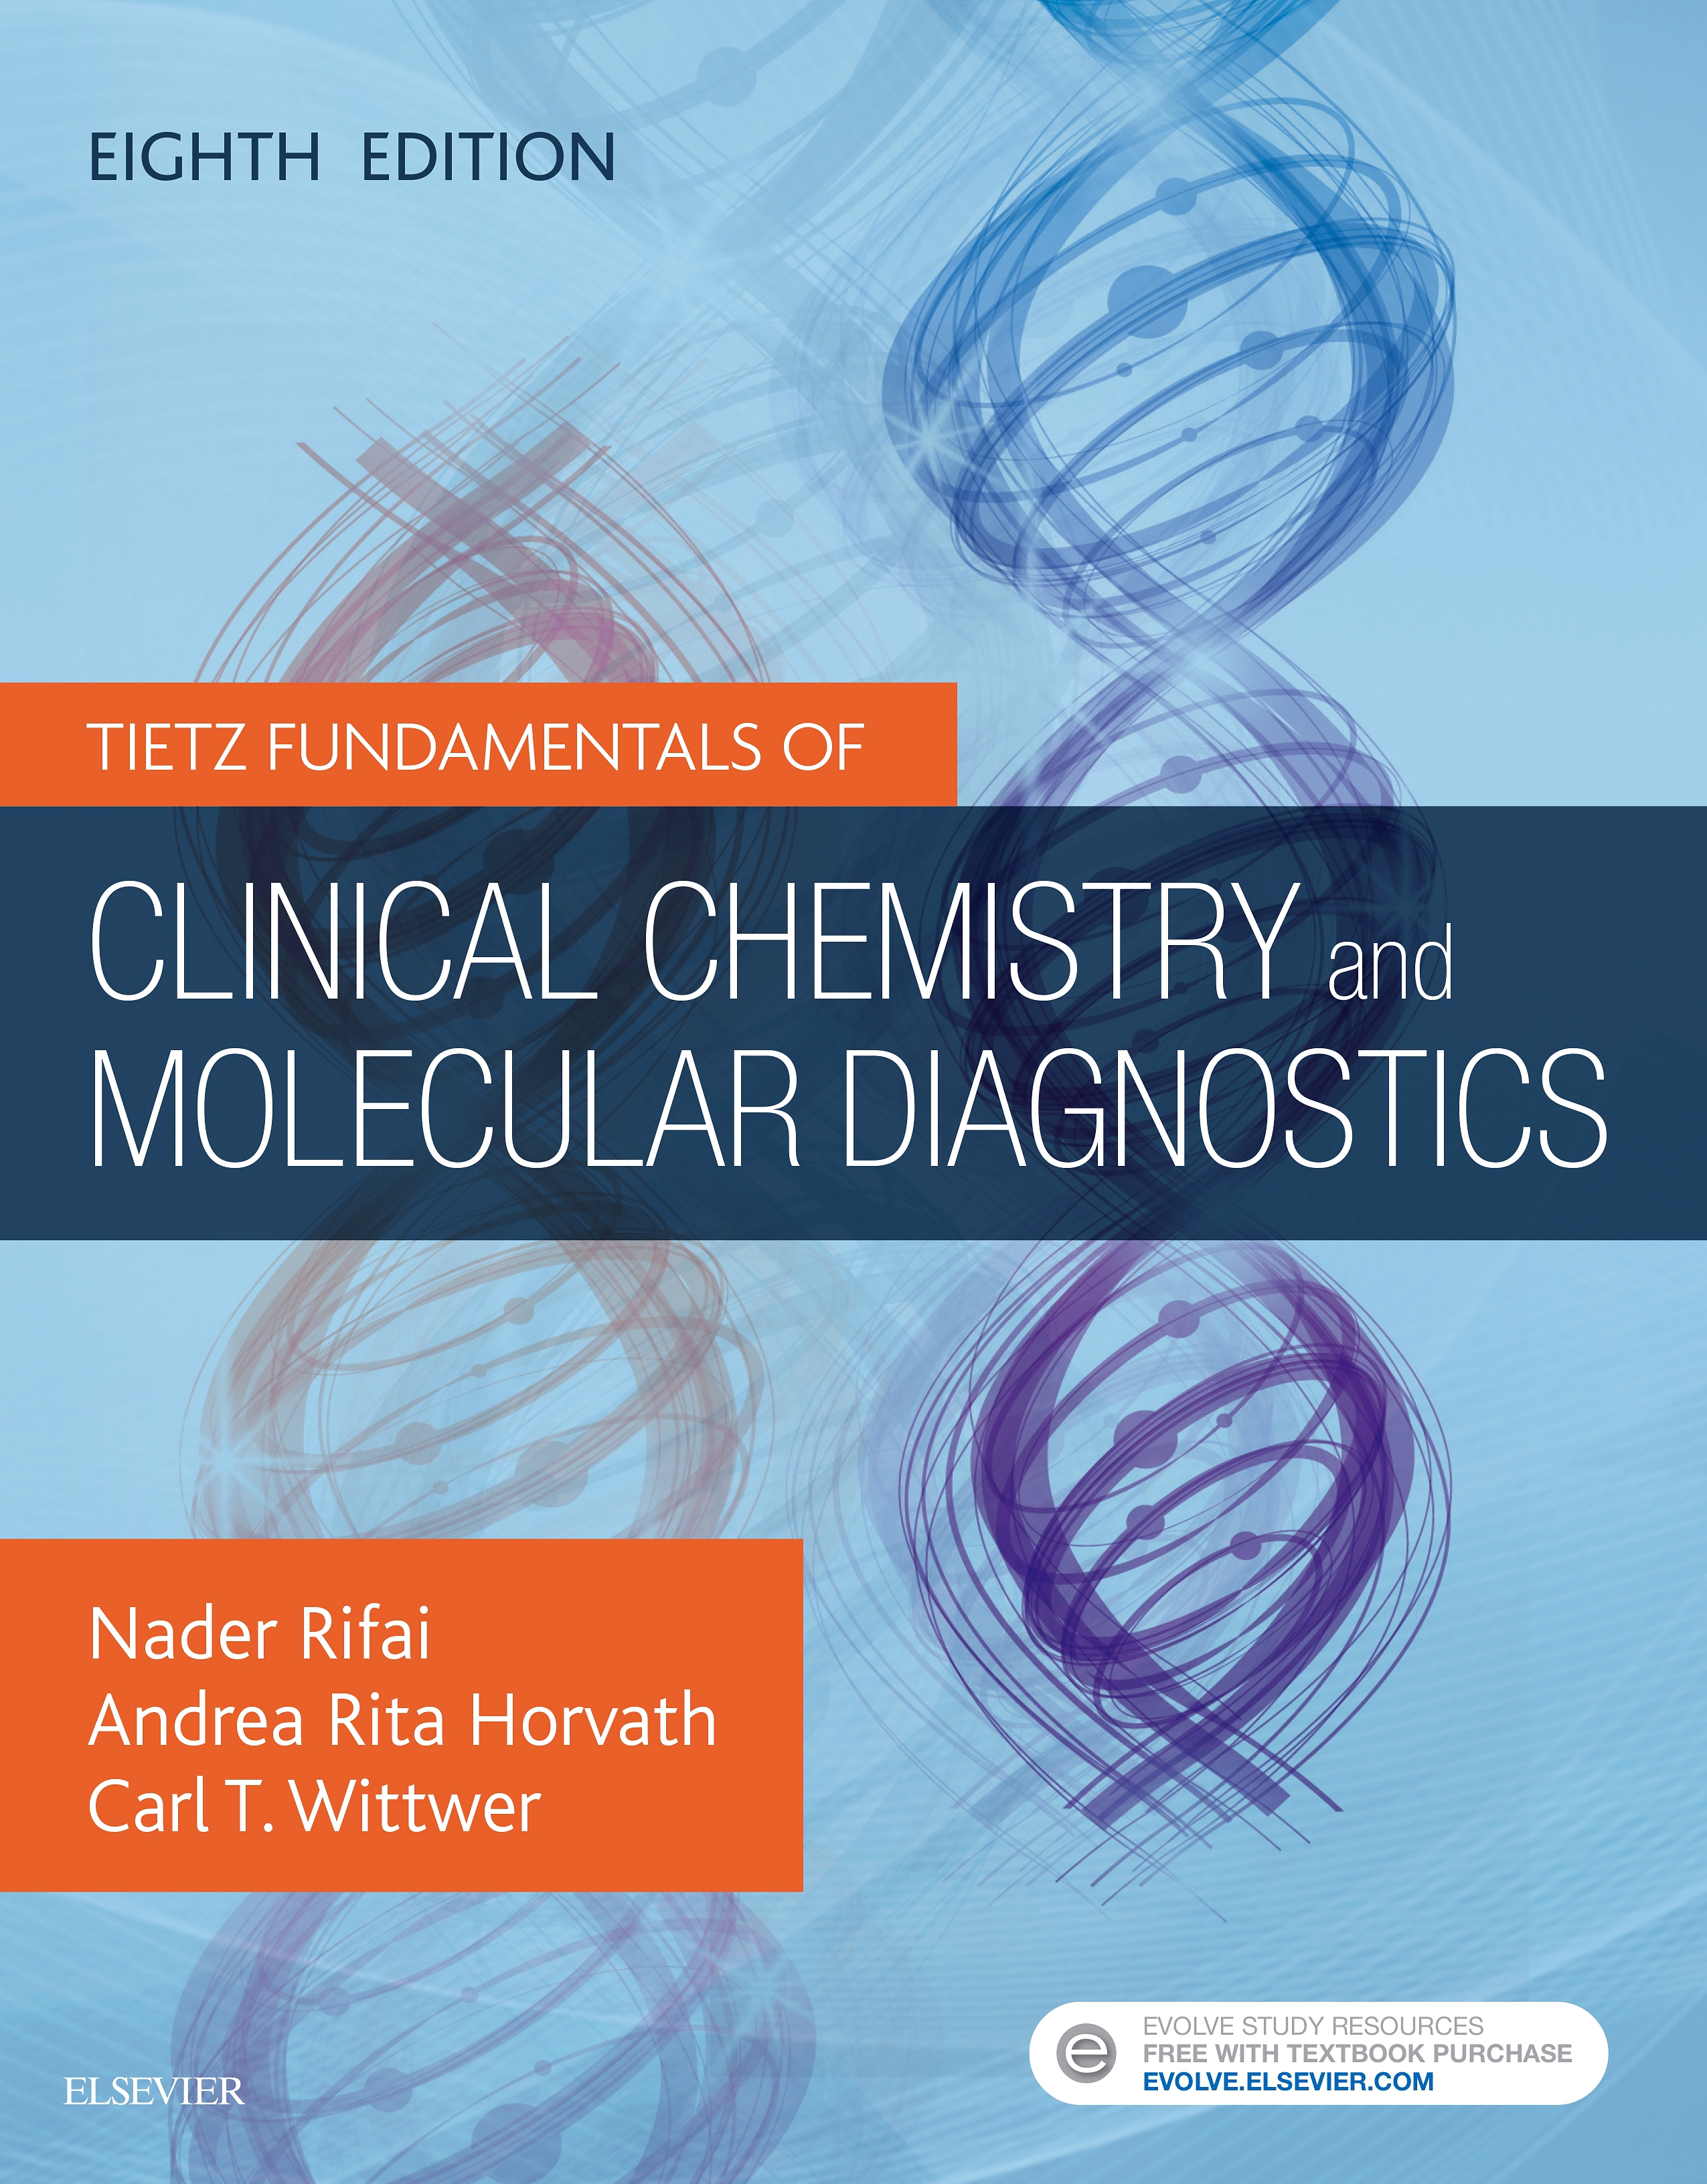 Evolve Resources for Tietz Fundamentals of Clinical Chemistry and Molecular Diagnostics, 8th Edition